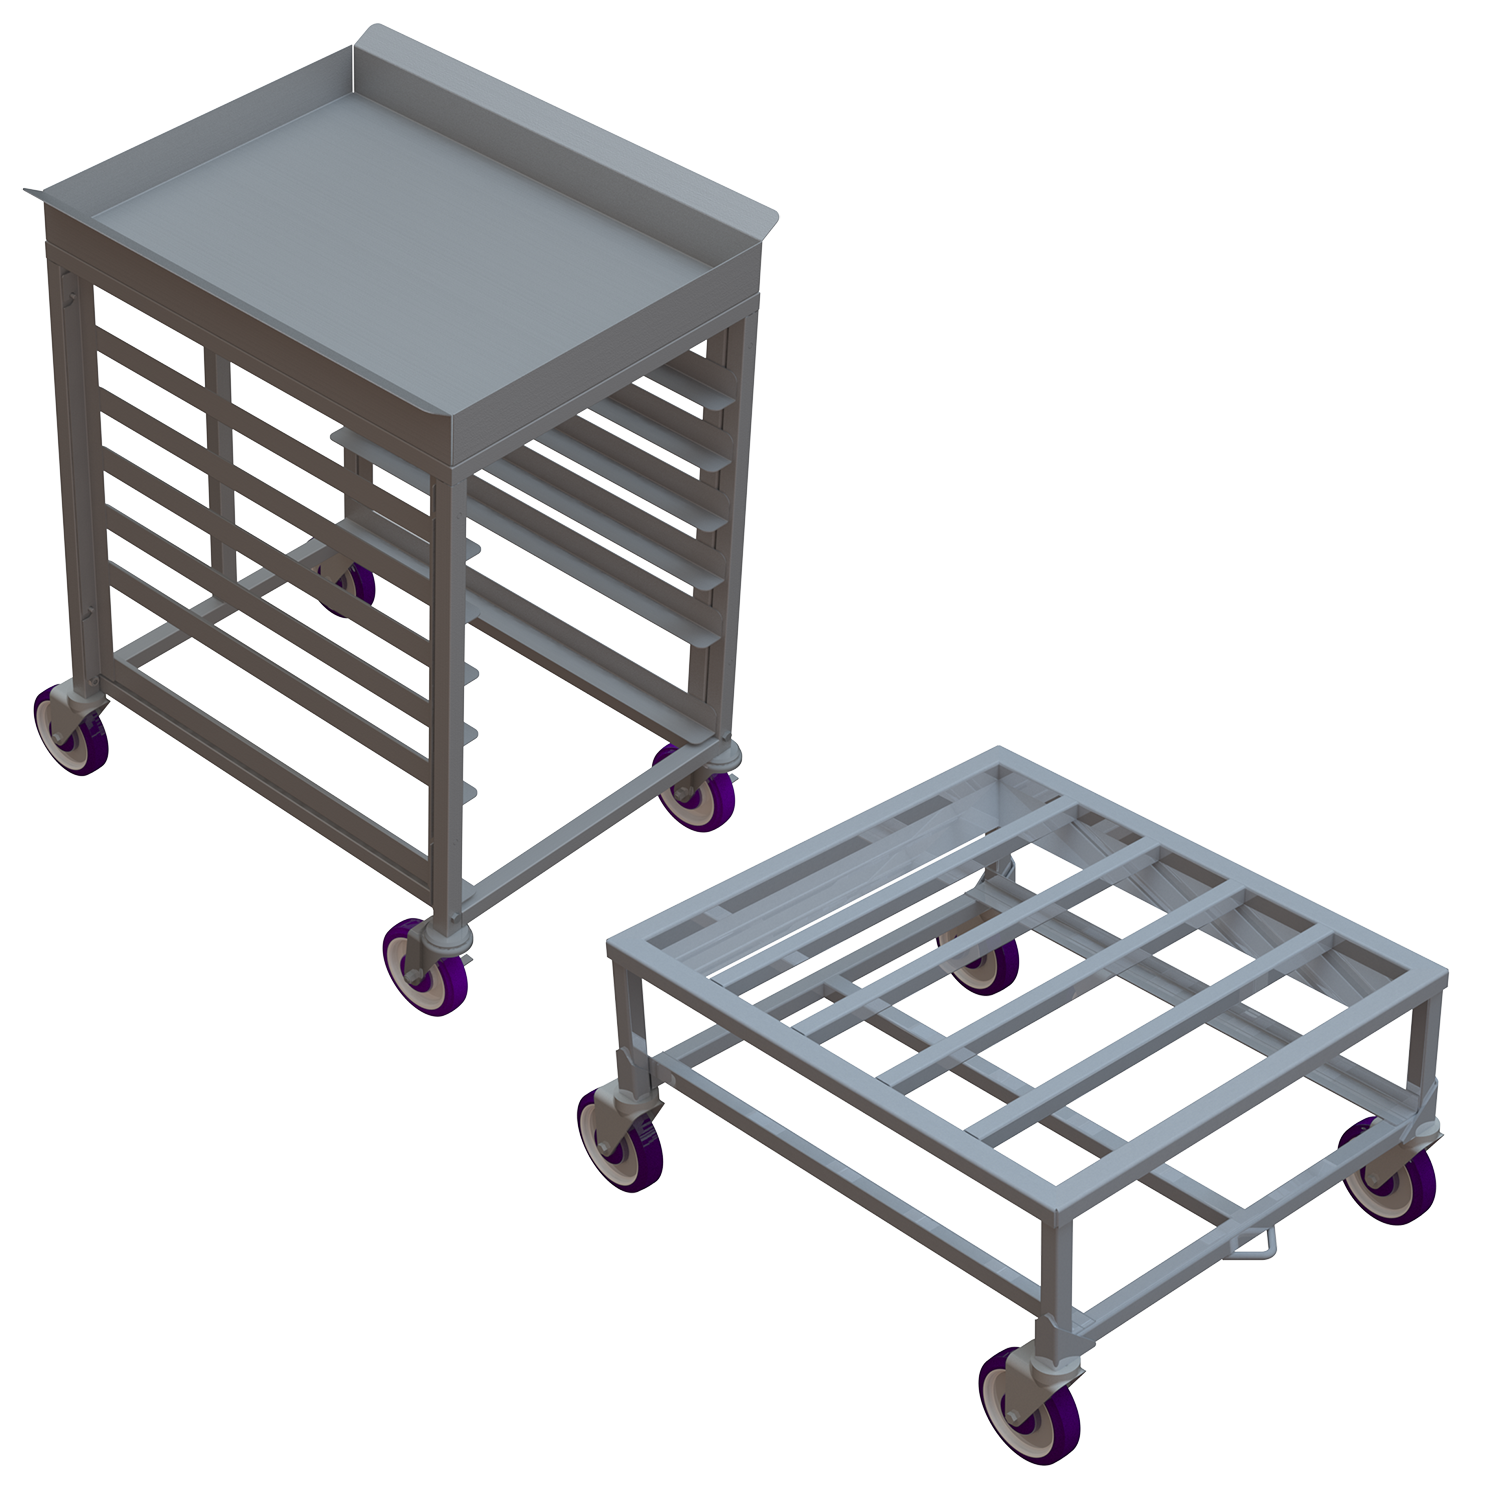 Dolly chicken dollies industrial cart picking cart NSF cart NSF rack NSF approved NSF certified National Sanitation Foundation tray shelf Distribution Cart picking cart tray shelf picking cart, picking cart, ecom cart, ecommerce cart, ecommerce picking cart, picking cart, INDUSTRIAL CARTS, grocery cart grocery picking cart, department store cart, beverage cart